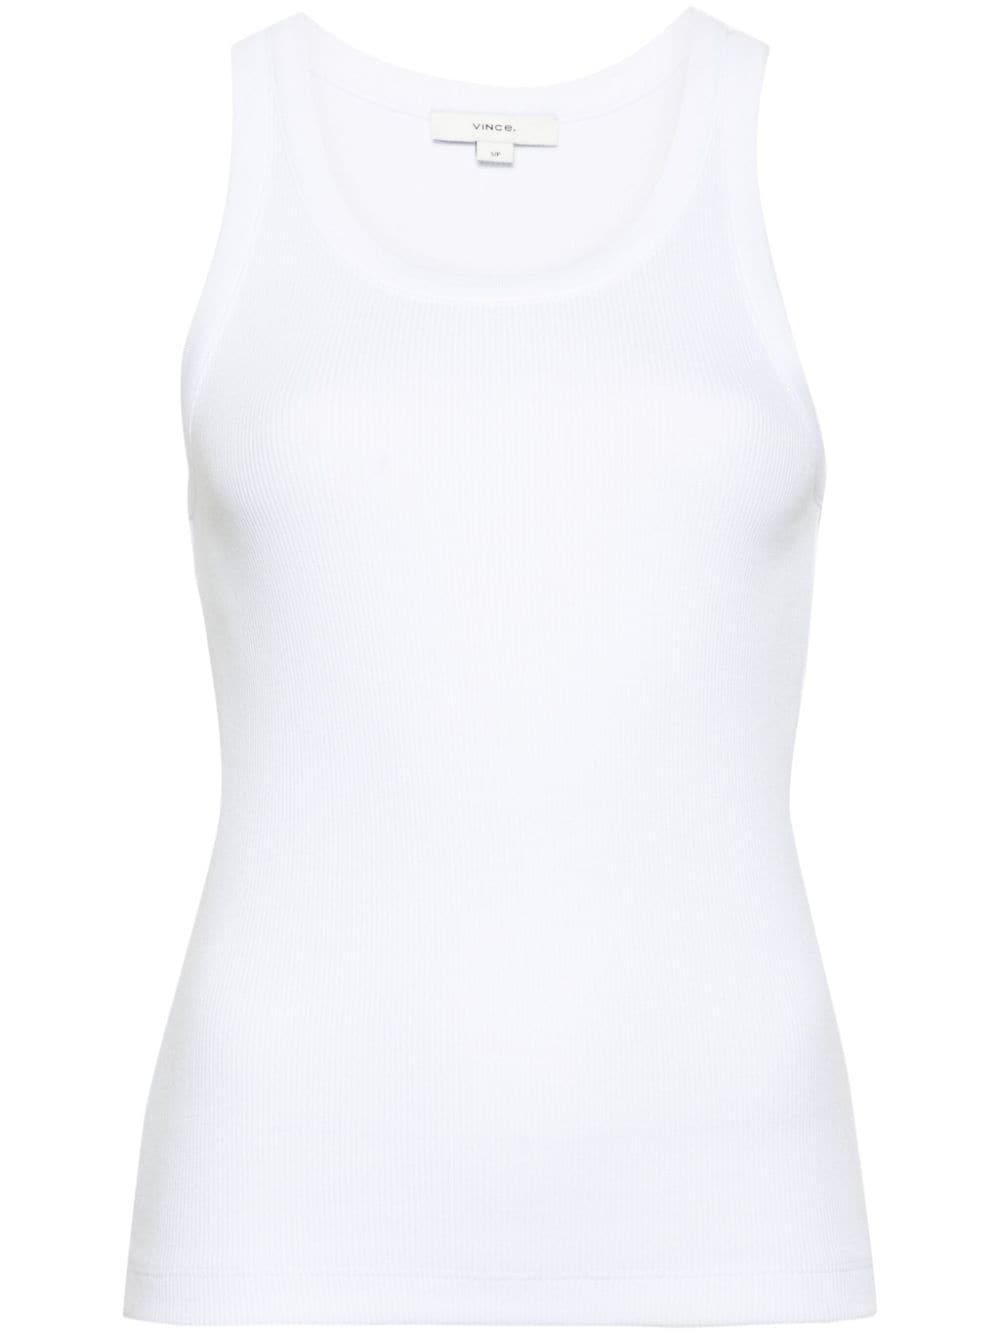 Vince scoop-neck ribbed tank top - White von Vince